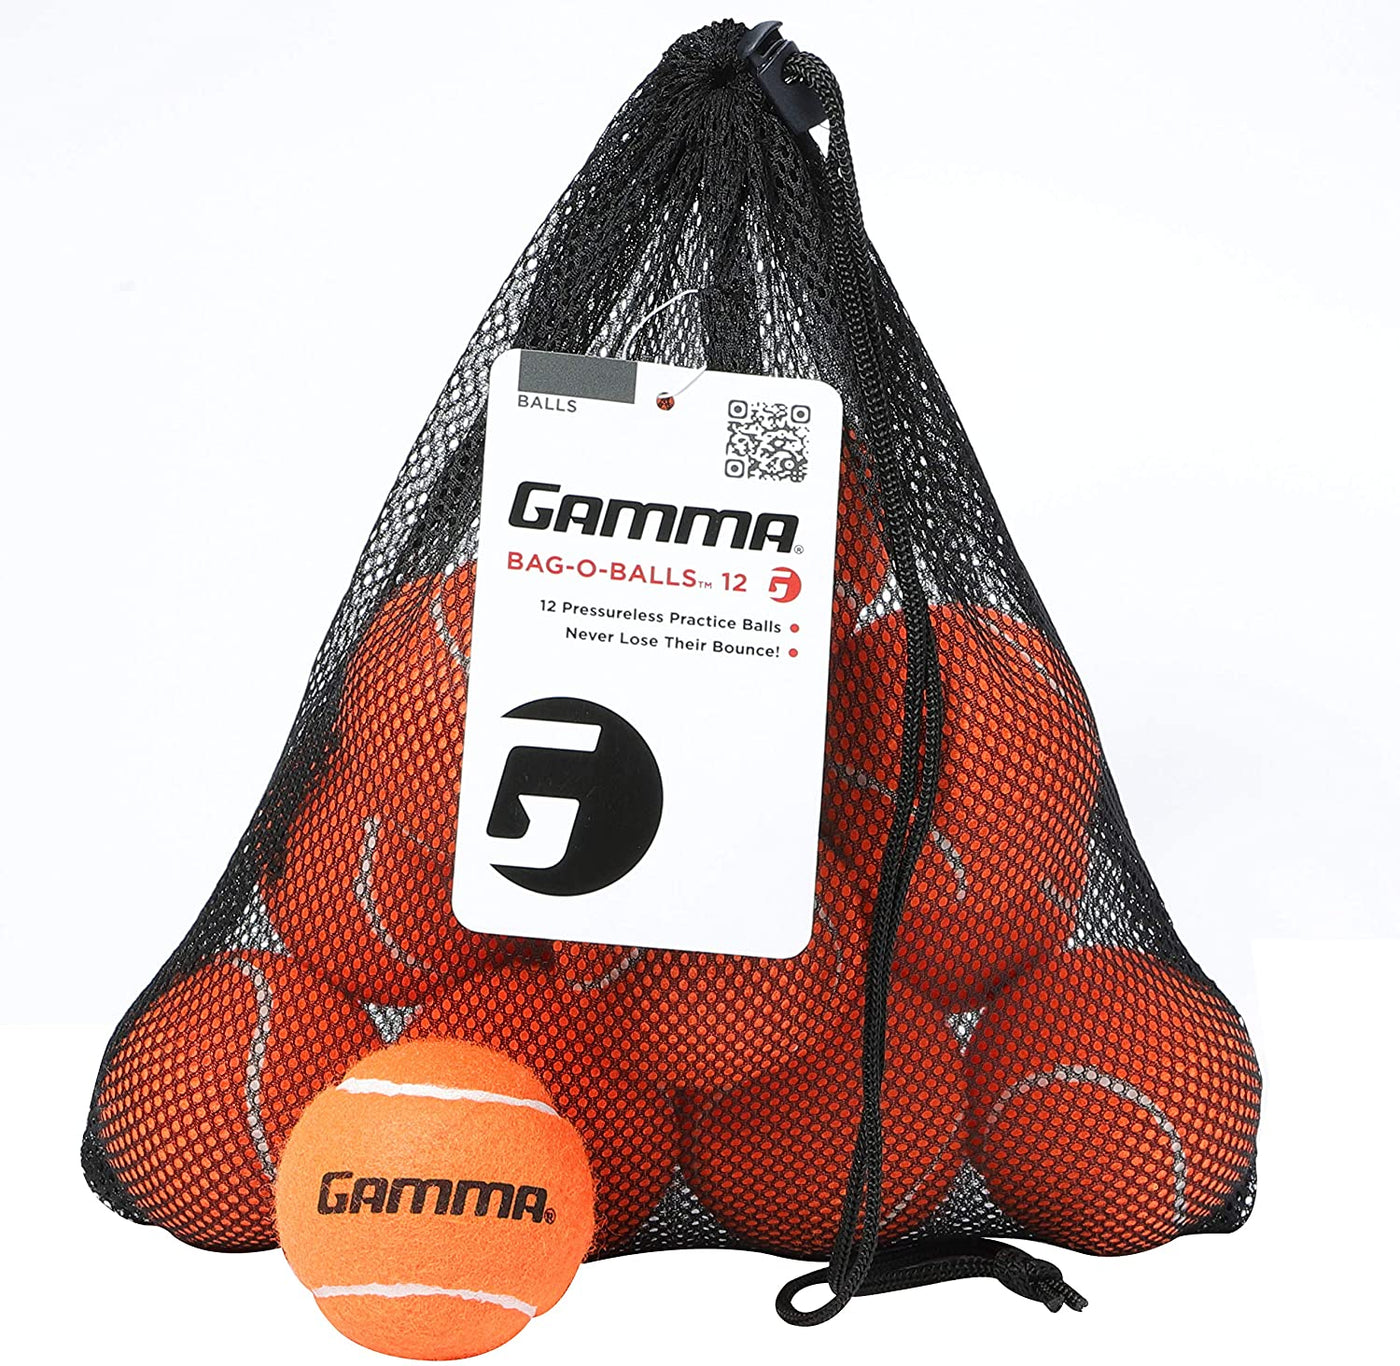 Gamma Bag of Pressureless Tennis Balls â€“ 12 or 18 Count, 4 Colors Available, Sturdy & Reuseable Mesh Bag with Drawstring for Easy Transport - Bag-O-Balls for All Court Types, Premium Performance